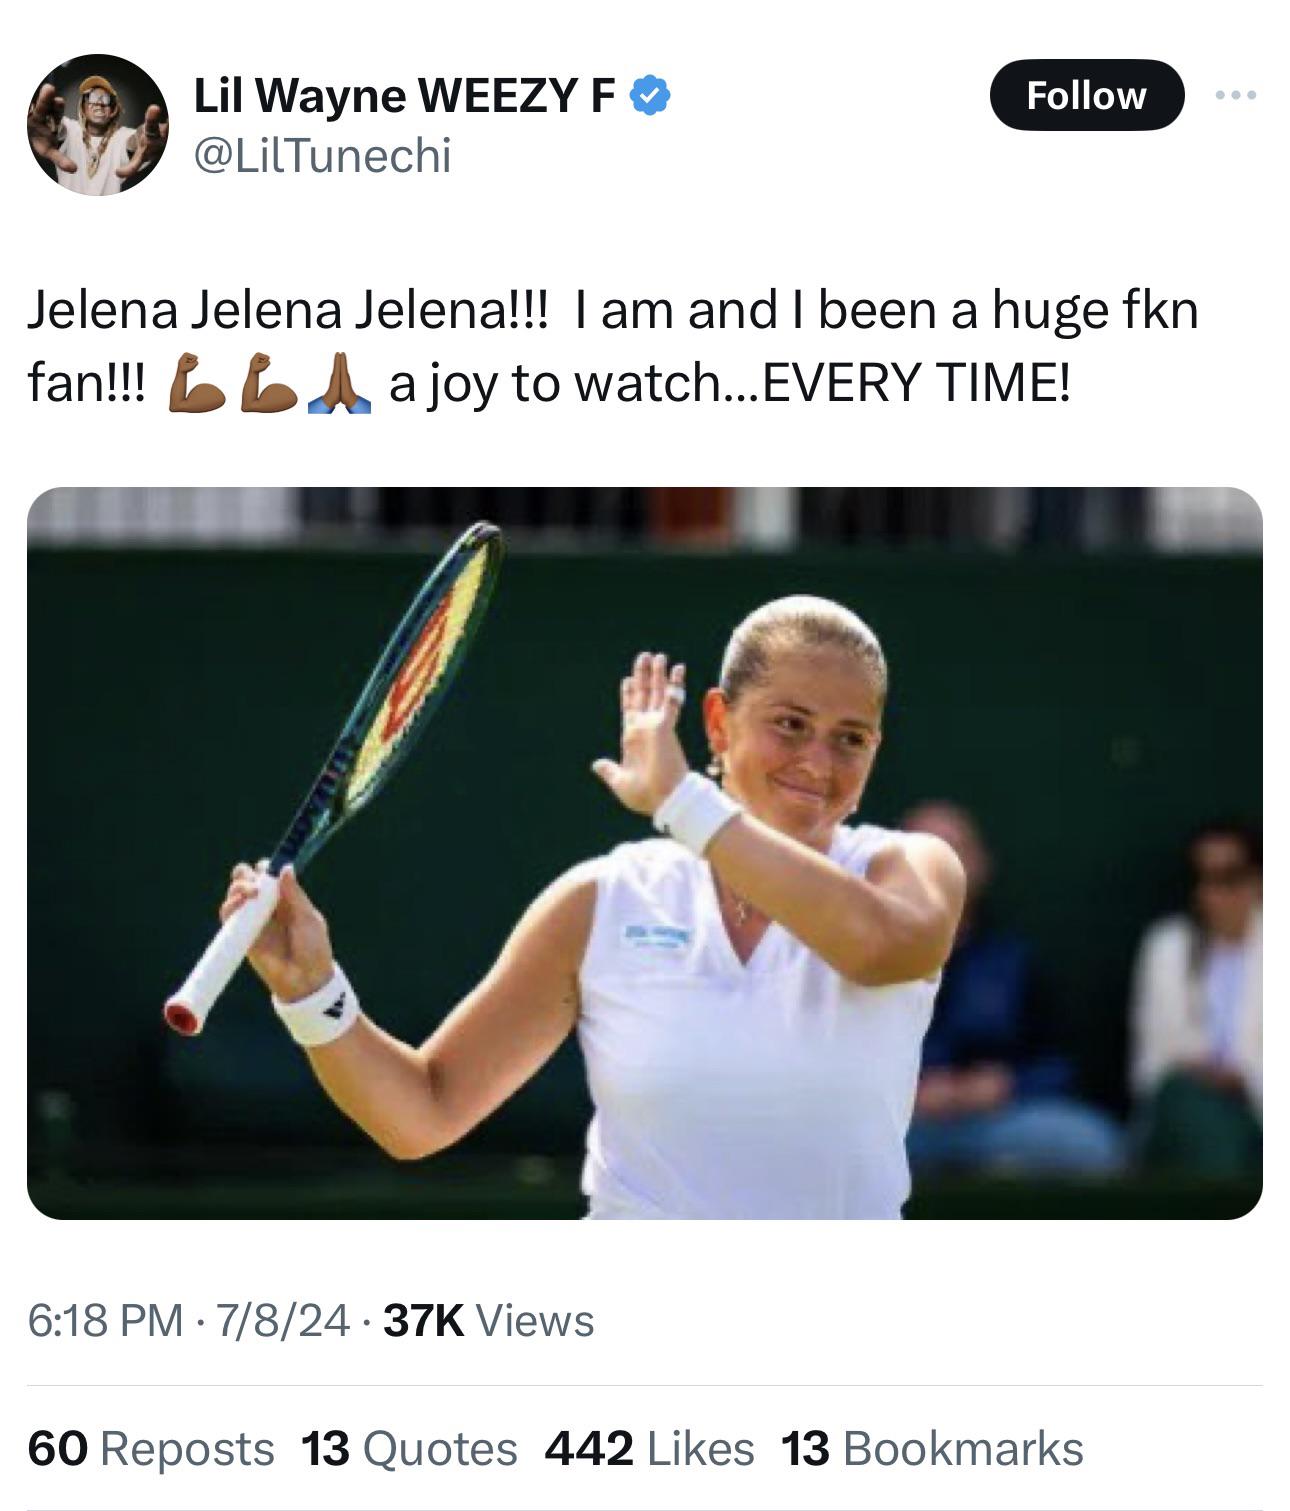 r/tennis - The Lil Penko friendship continues to thrive